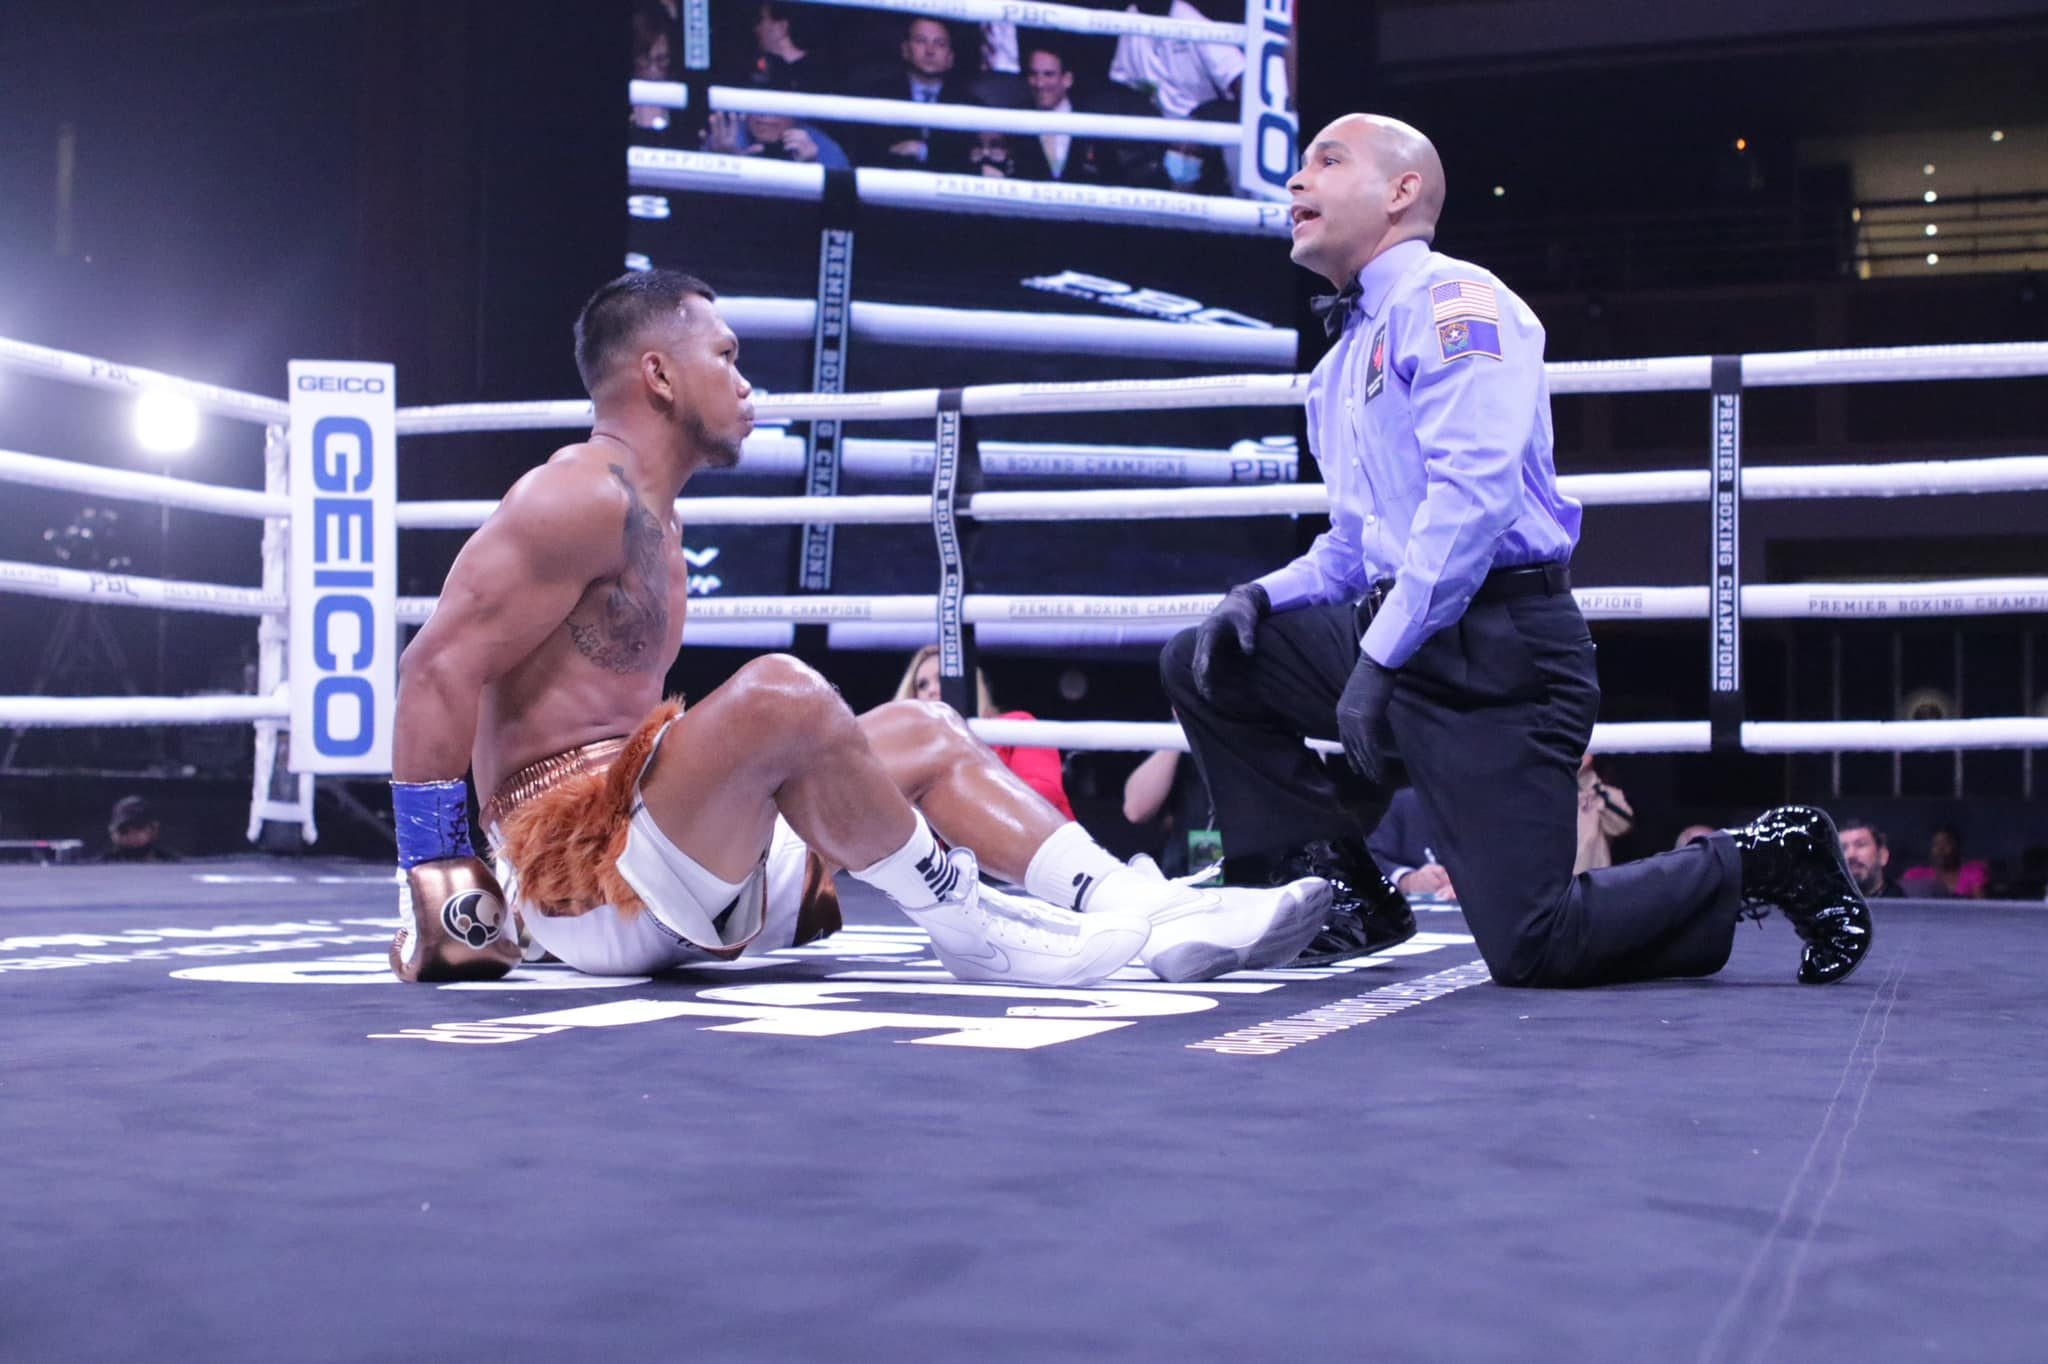 Marcial fashions out epic comeback, but should be wary of his 3 knockdowns